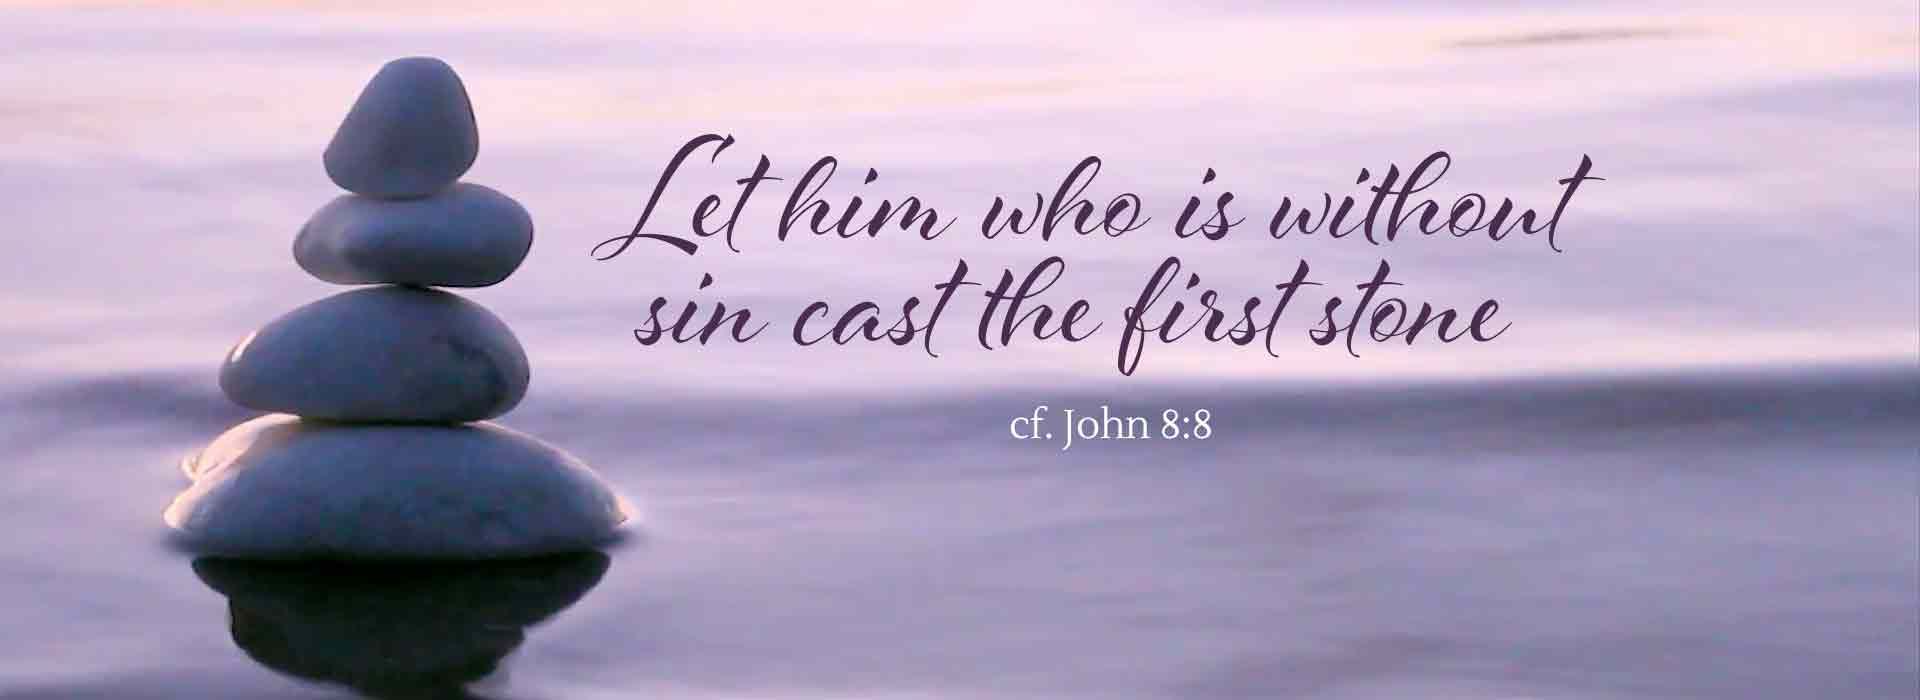 Let him who is without sin..